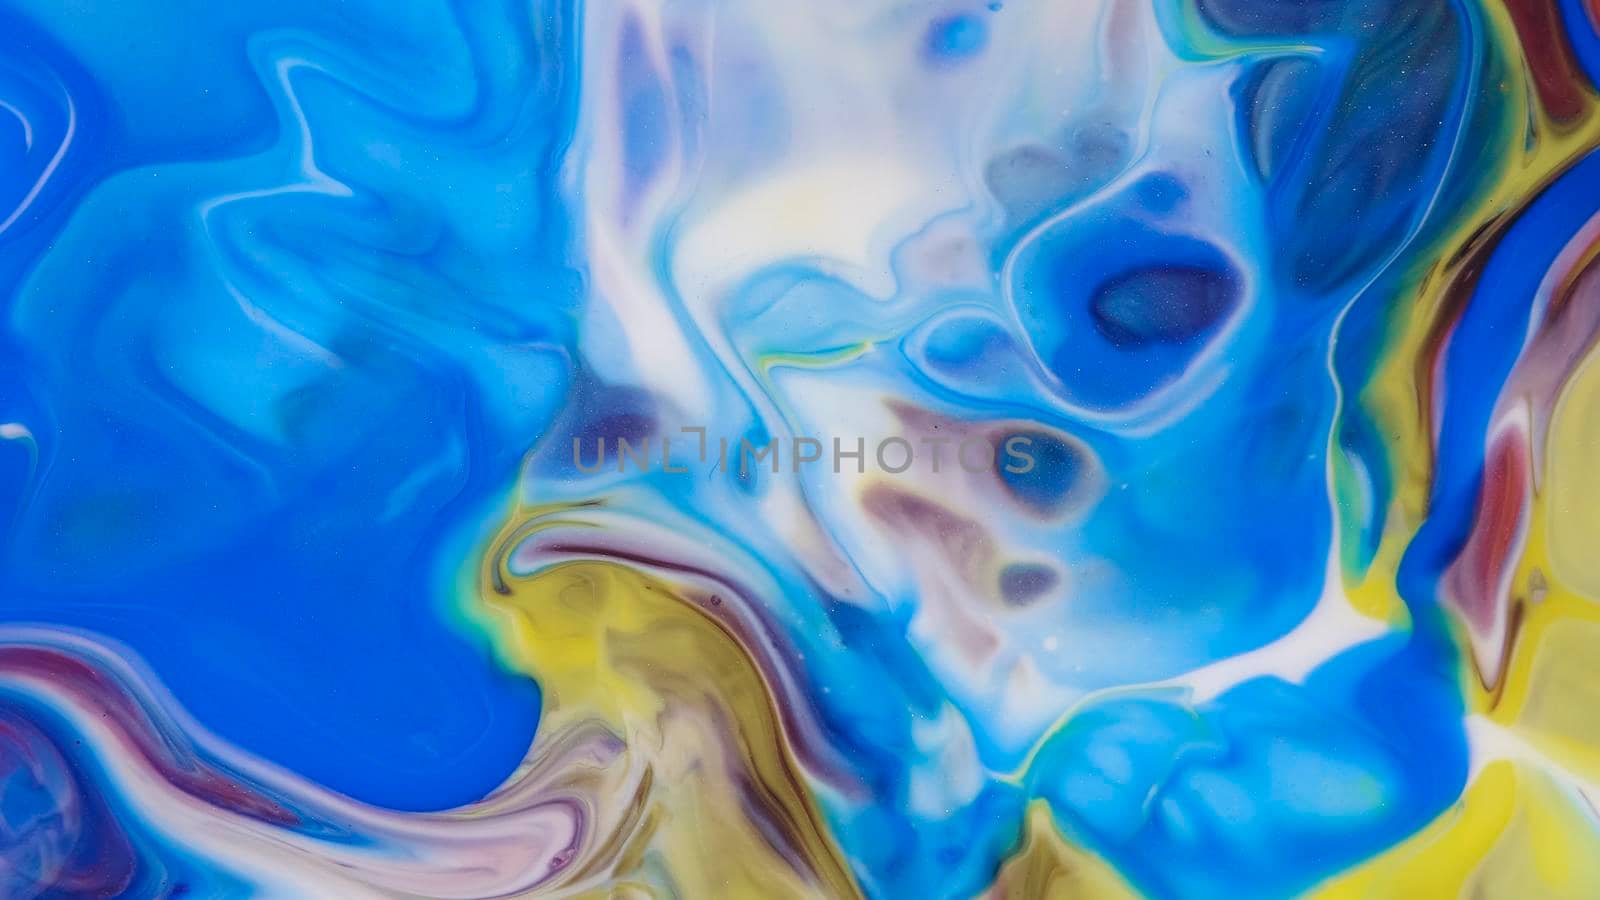 Blue stripes on a white background with gold flecks of yellow. Liquid abstractions. Abstract natural art. Abstract painting. Marble effect painting. Mixed azure and white oil paints. Unusual handmade background for poster, card, invitation.